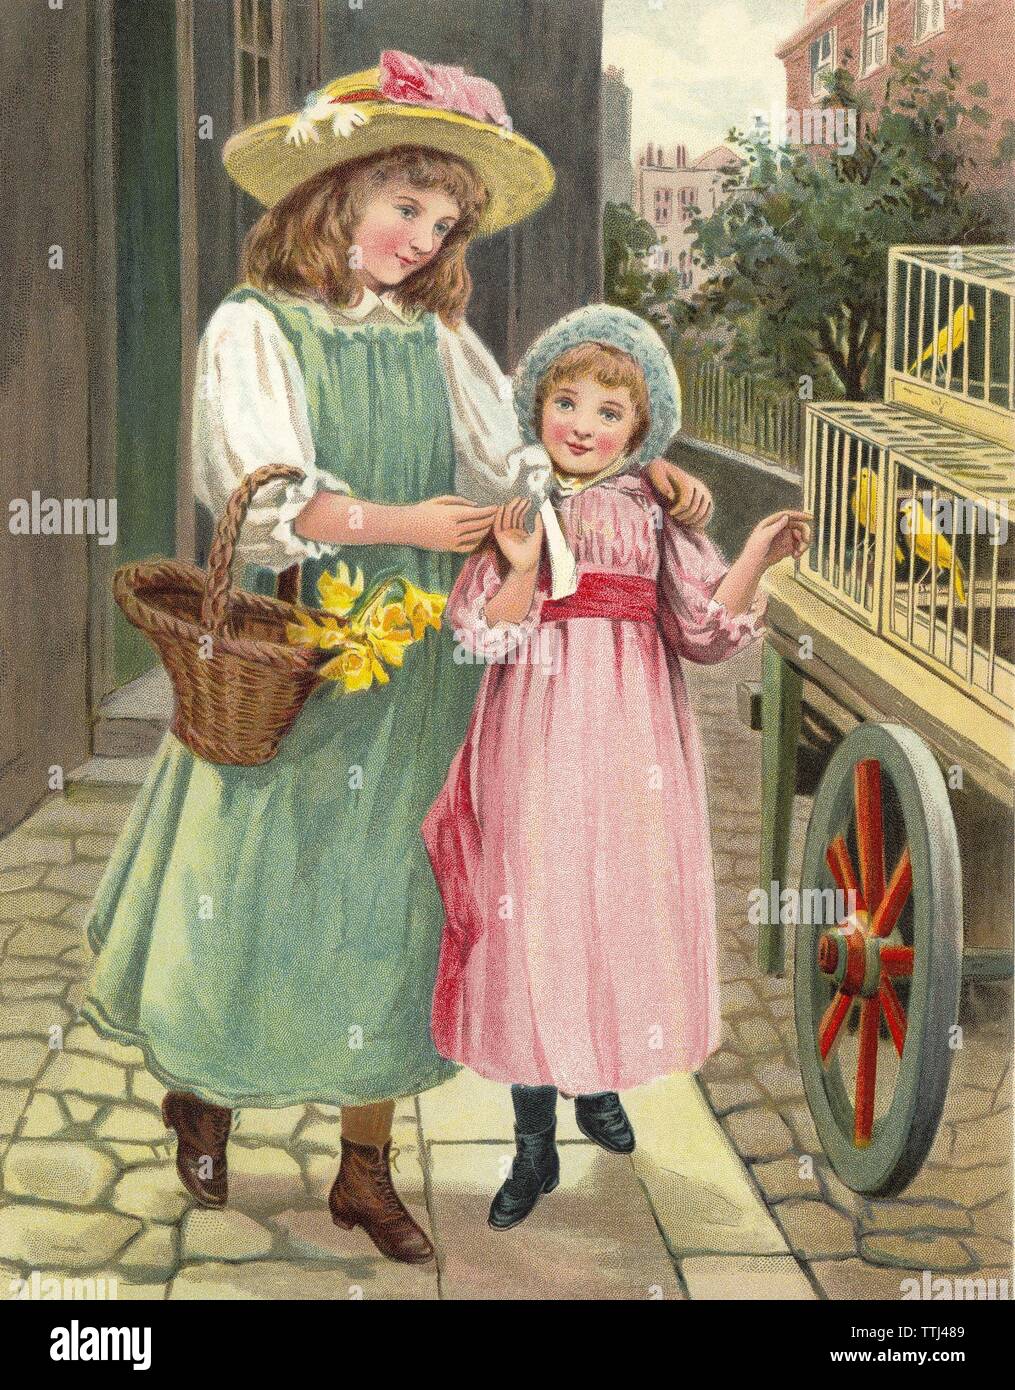 Two girls with flowers and birds in cages on this illustration from the turn of the century 1800-1900. Stock Photo